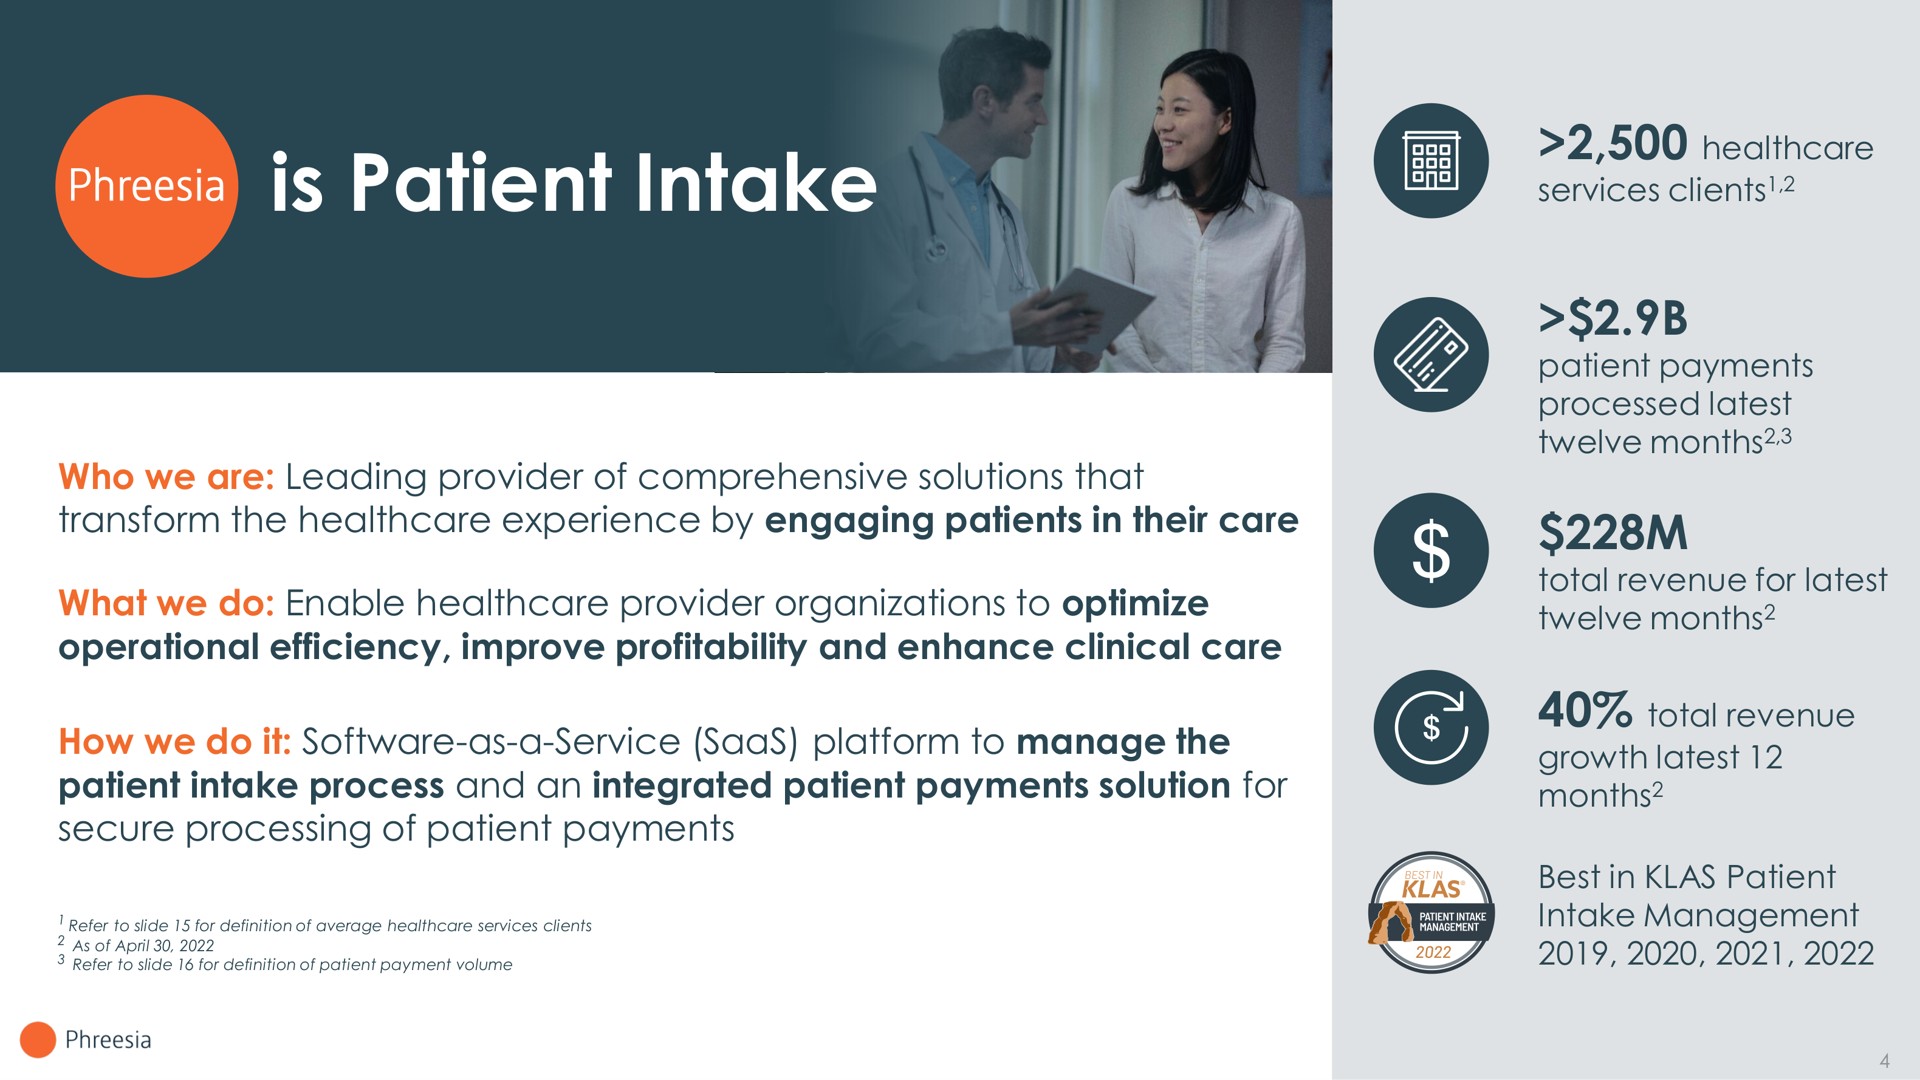 is patient intake who we are leading provider of comprehensive solutions that transform the experience by engaging patients in their care what we do enable provider organizations to optimize operational efficiency improve profitability and enhance clinical care how we do it as a service platform to manage the patient intake process and an integrated patient payments solution for secure processing of patient payments services clients patient payments processed latest twelve months total revenue for latest twelve months total revenue growth latest months best in patient intake management | Phreesia